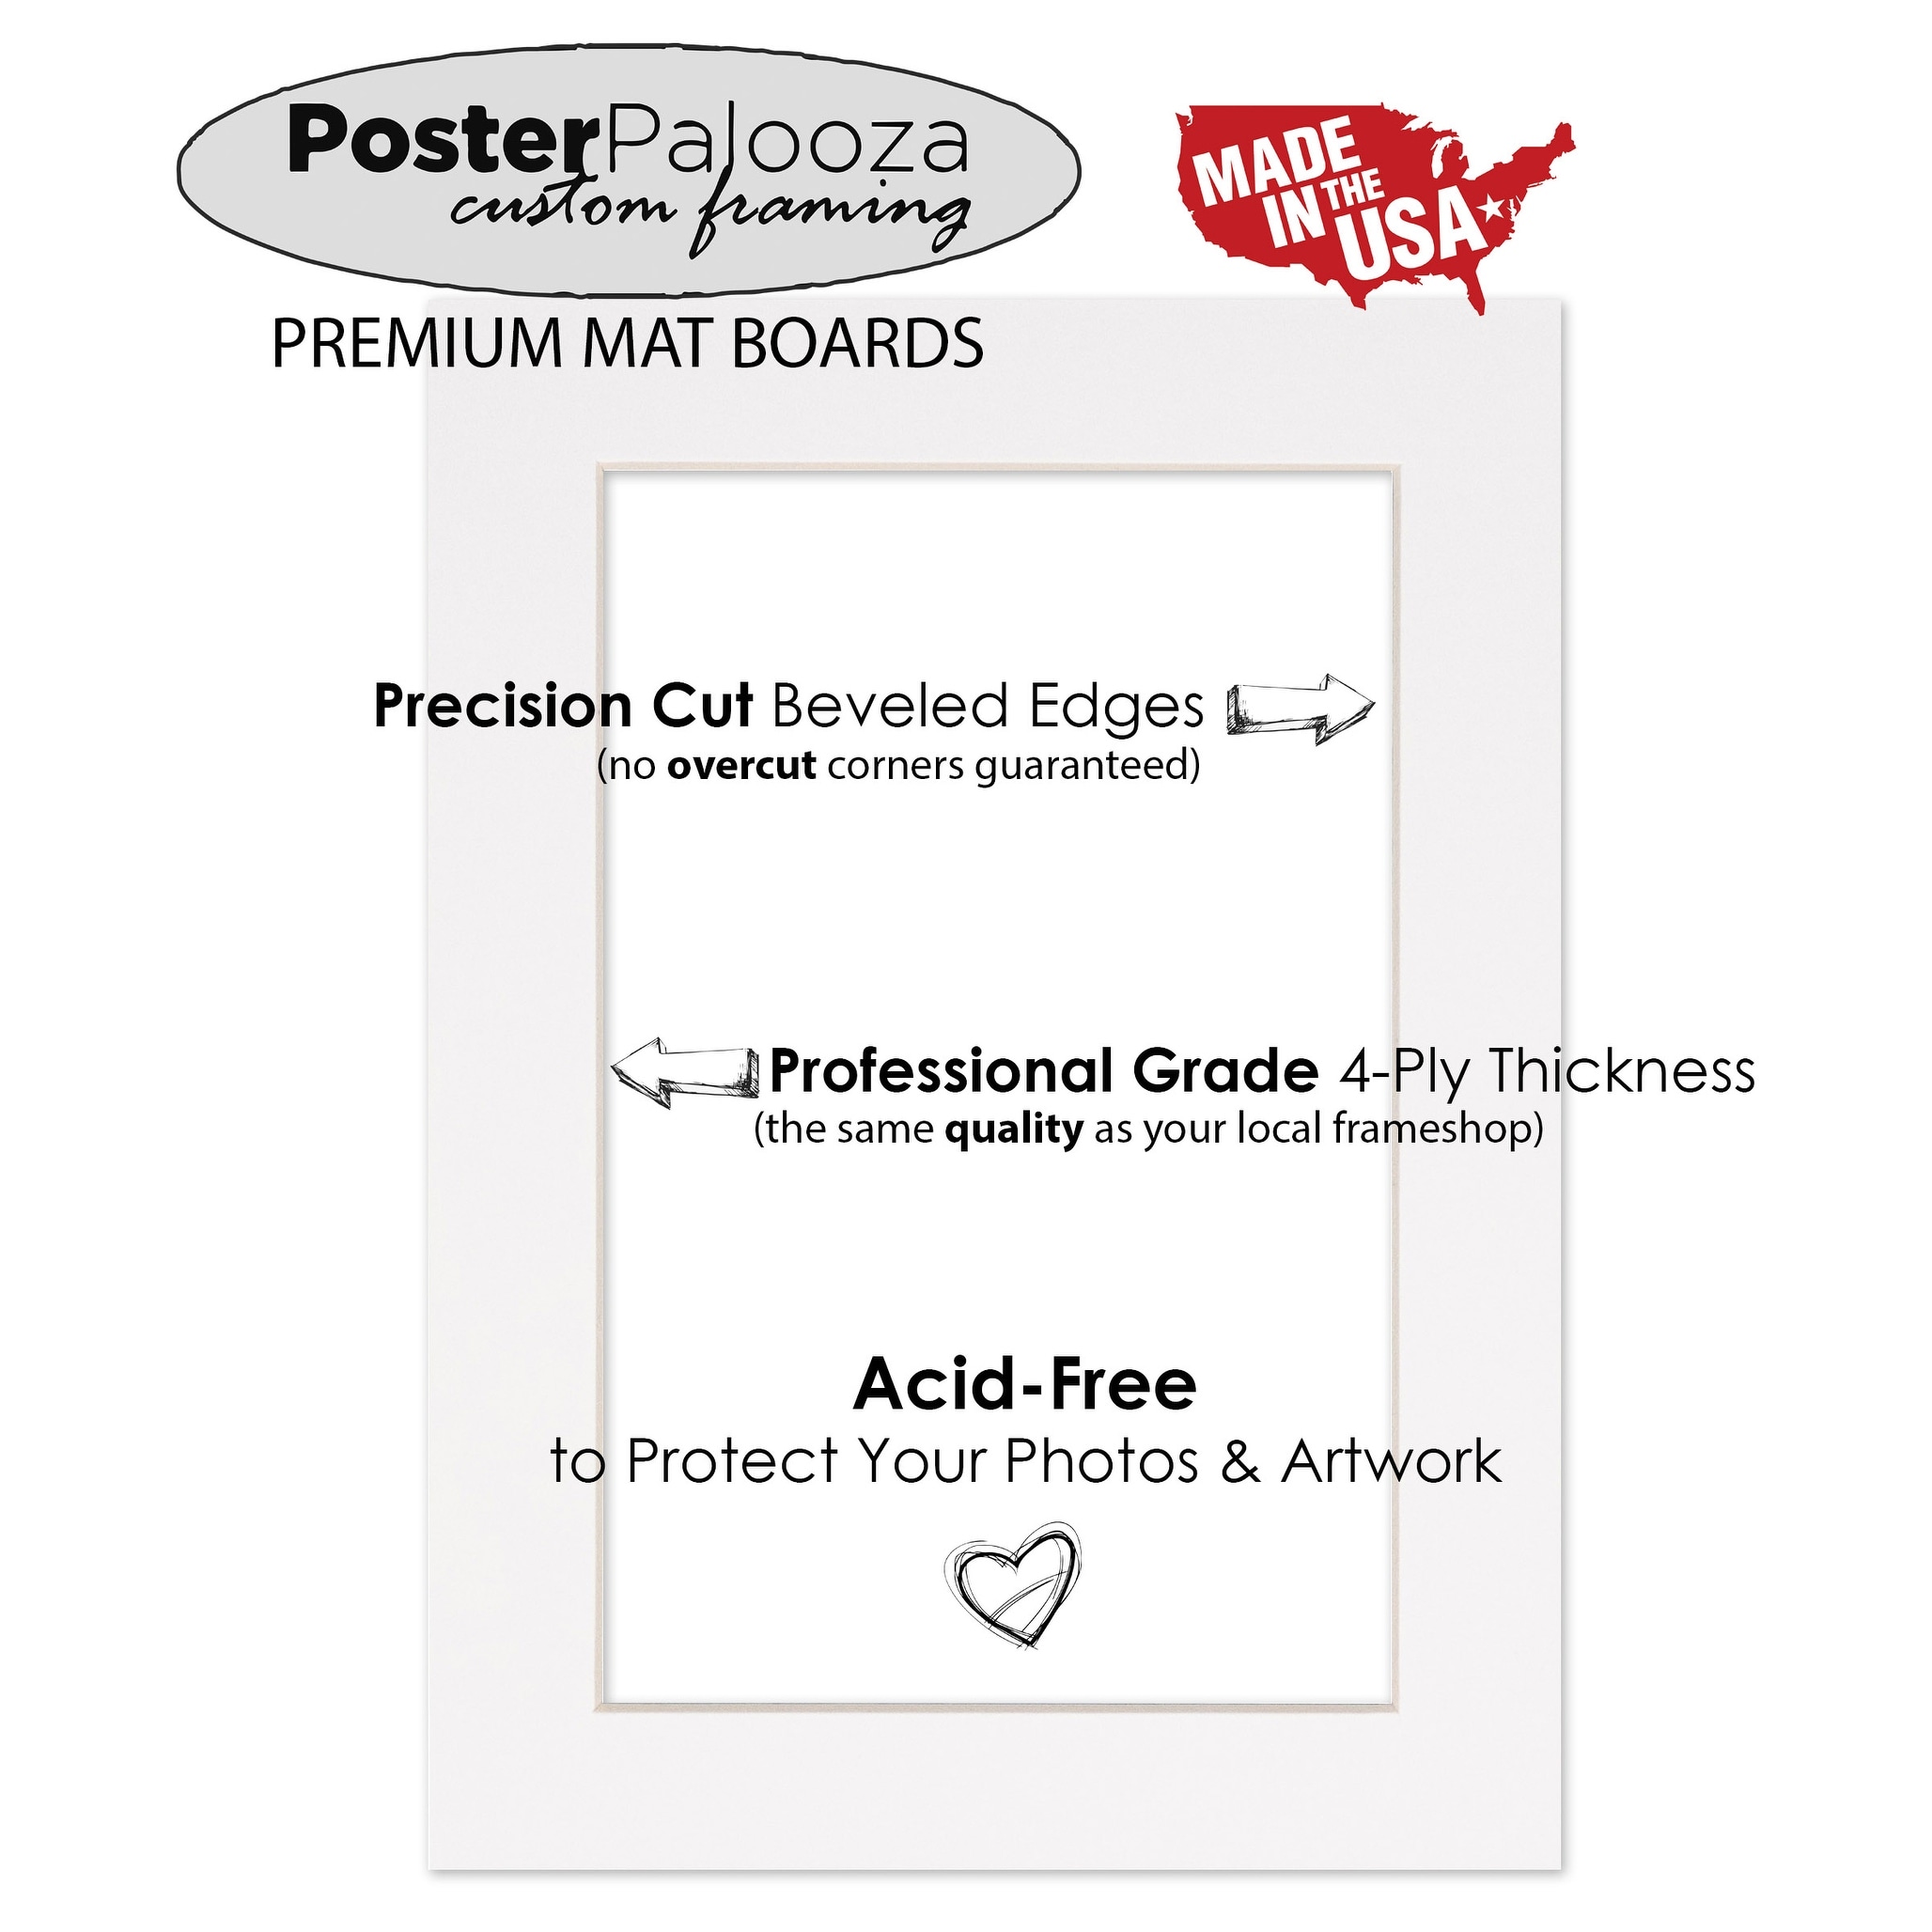 8x10 Mat for 5x7 Photo - White with Black Core Matboard for Frames Measuring 8 x 10 In- to Display Art Measuring 5 x 7 Inches